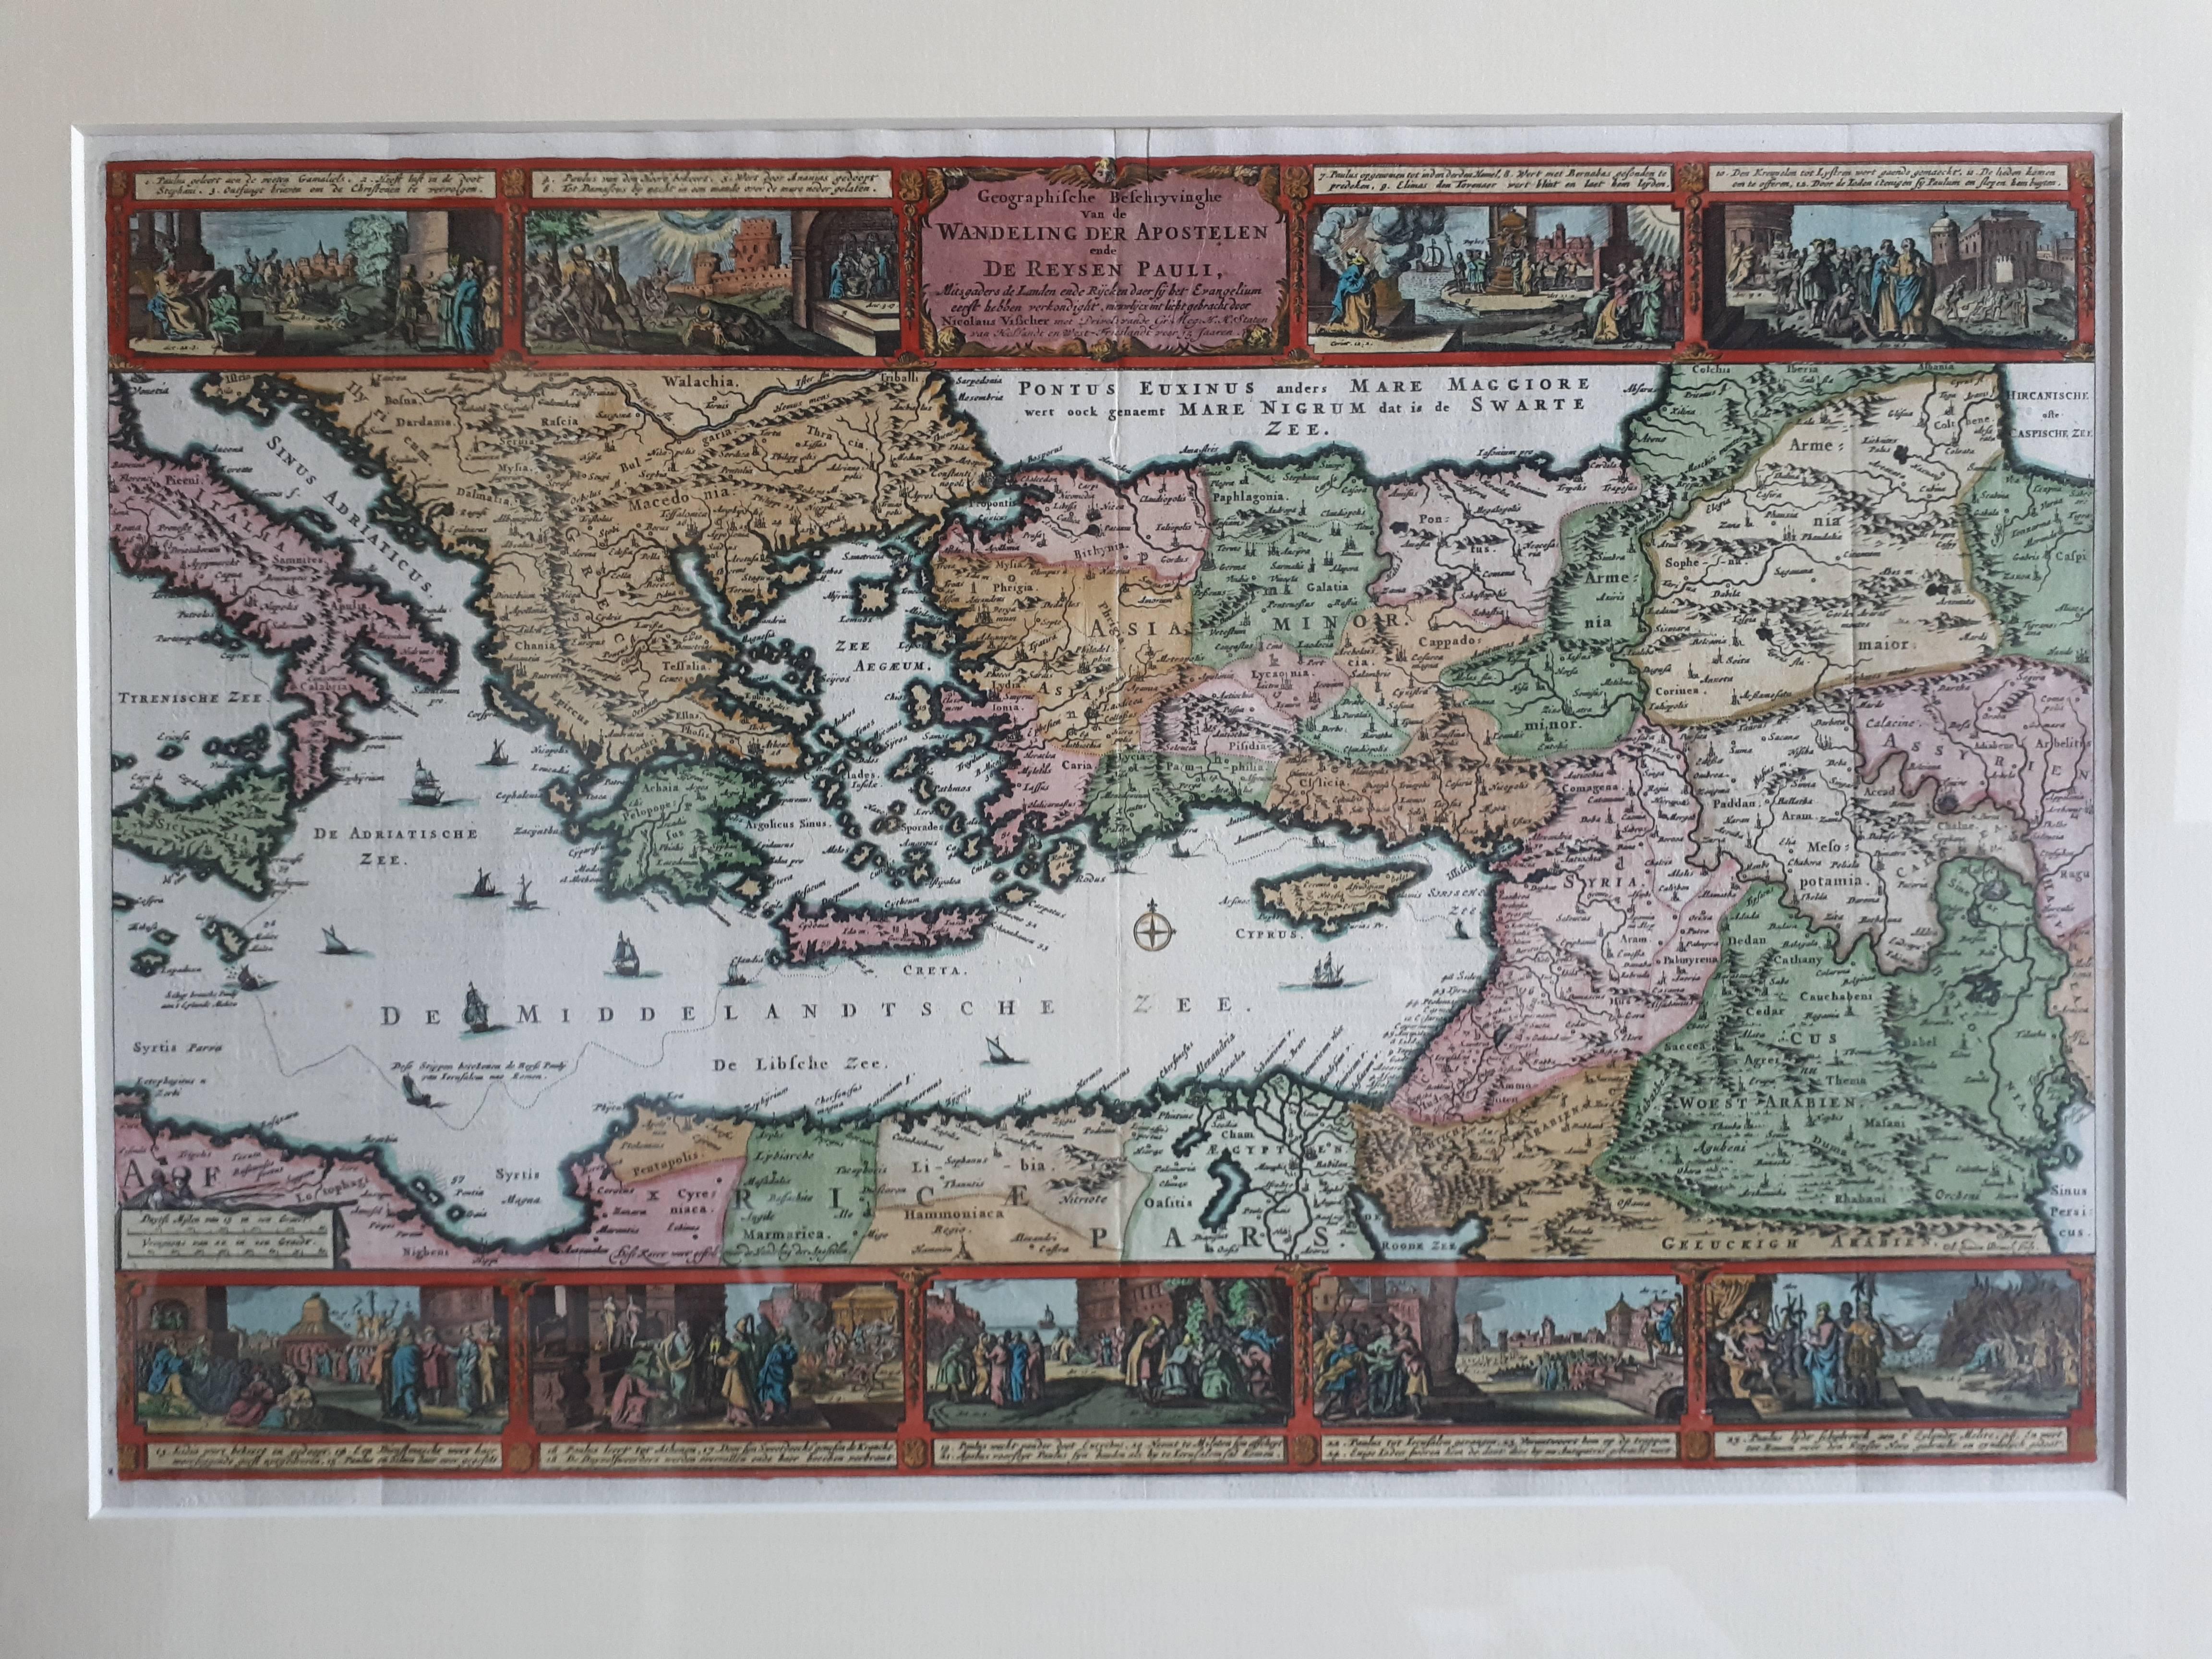 Antique map titled 'Geographische Beschryvinghe van de Wandeling der Apostelen ende de Reysen Pauli'. Decorative map of the Eastern Mediterranean, from Italy and Sicily to Asia Minor, Armenia, Iraq and the Red Sea, illustrating the travel of the St.